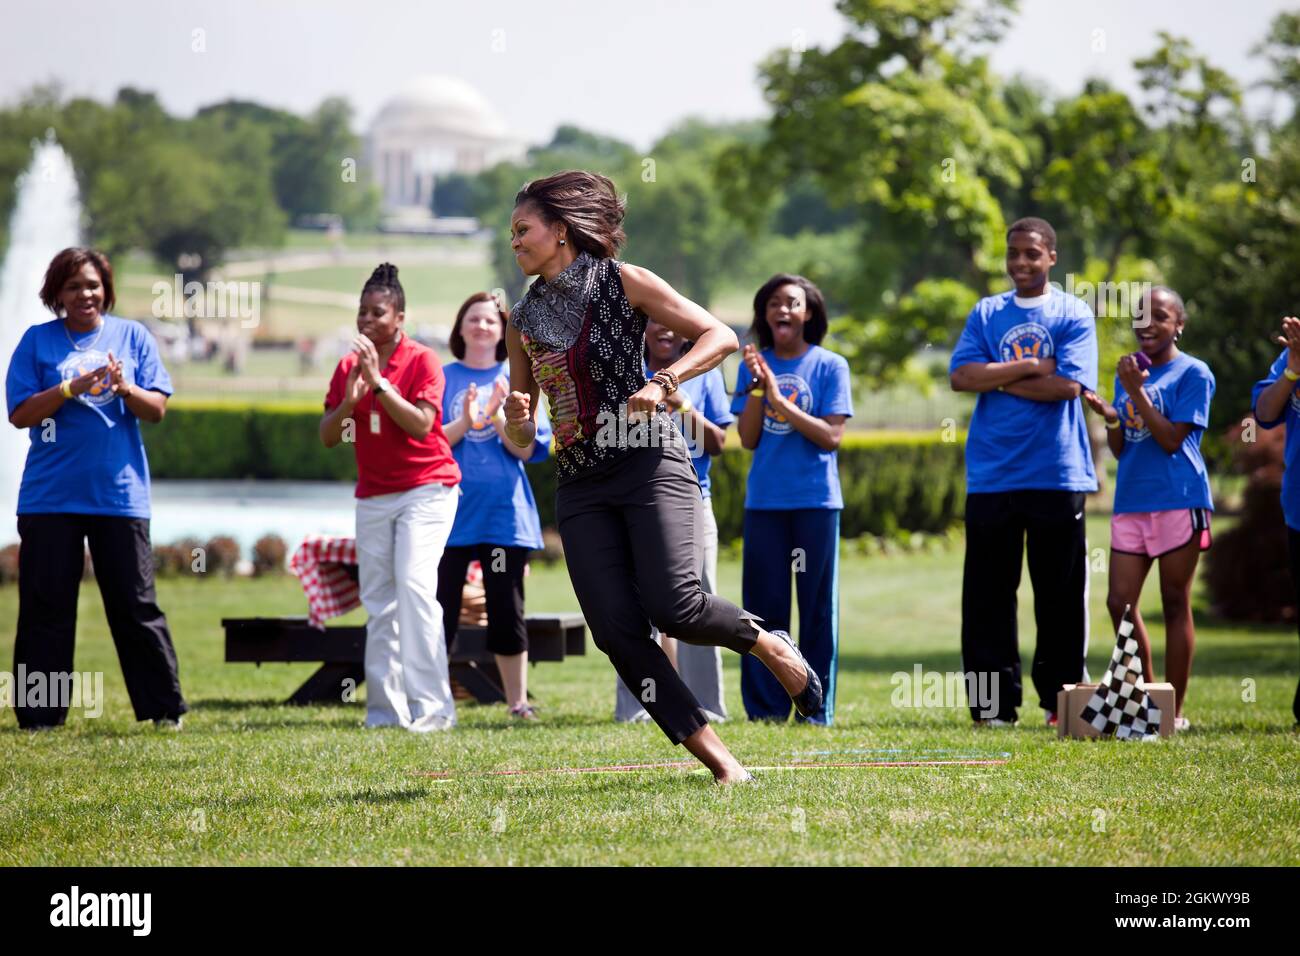 First Lady Michelle Obama participates in the ÒPit Crew ChallengeÓ  during an event with the President's Council on Fitness, Sports and Nutrition on the South Lawn of the White House, May 9, 2011. The First Lady visited seven activity stations during the event, which helped promote both the Let's Move! and Joining Forces initiatives. (Official White House Photo by Chuck Kennedy)  This official White House photograph is being made available only for publication by news organizations and/or for personal use printing by the subject(s) of the photograph. The photograph may not be manipulated in an Stock Photo